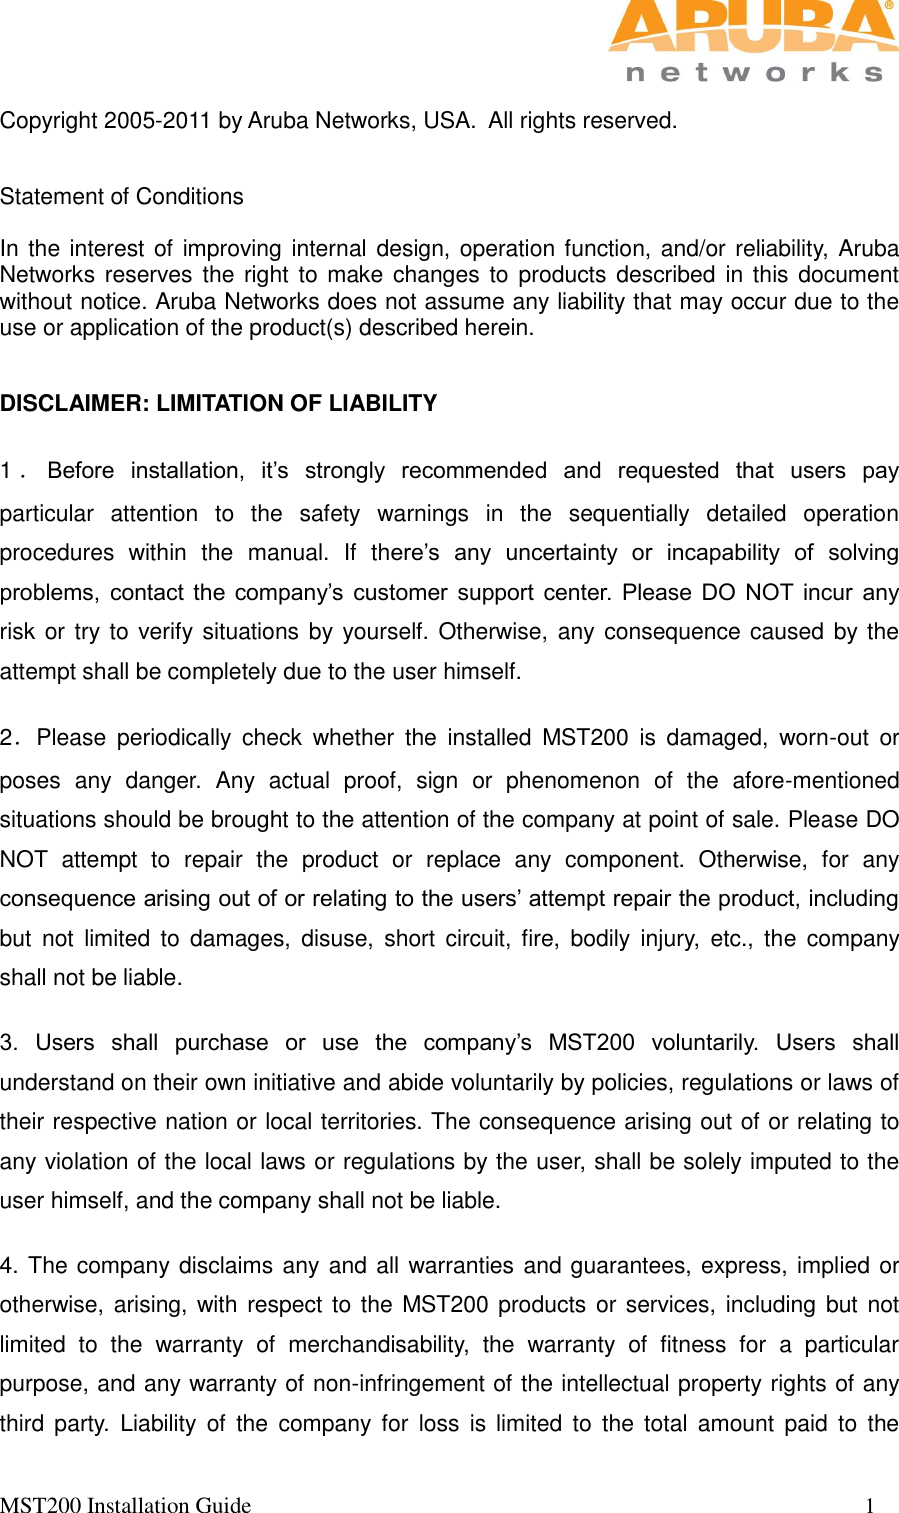   MST200 Installation Guide                                                                                                           1                                                                                                                                                                                        Copyright 2005-2011 by Aruba Networks, USA.  All rights reserved.    Statement of Conditions  In the interest of improving internal design, operation function, and/or reliability, Aruba Networks reserves the right to make changes to  products described in this document without notice. Aruba Networks does not assume any liability that may occur due to the use or application of the product(s) described herein.  DISCLAIMER: LIMITATION OF LIABILITY 1．Before  installation,  it’s  strongly  recommended  and  requested  that  users  pay particular  attention  to  the  safety  warnings  in  the  sequentially  detailed  operation procedures  within  the  manual.  If  there’s  any  uncertainty  or  incapability  of  solving problems,  contact  the  company’s  customer  support  center.  Please  DO  NOT  incur  any risk or try to verify situations by yourself. Otherwise, any consequence caused by the attempt shall be completely due to the user himself. 2．Please  periodically  check  whether  the  installed  MST200  is  damaged,  worn-out  or poses  any  danger.  Any  actual  proof,  sign  or  phenomenon  of  the  afore-mentioned situations should be brought to the attention of the company at point of sale. Please DO NOT  attempt  to  repair  the  product  or  replace  any  component.  Otherwise,  for  any consequence arising out of or relating to the users’ attempt repair the product, including but  not  limited  to  damages,  disuse,  short  circuit,  fire,  bodily  injury,  etc.,  the  company shall not be liable. 3.  Users  shall  purchase  or  use  the  company’s  MST200  voluntarily.  Users  shall understand on their own initiative and abide voluntarily by policies, regulations or laws of their respective nation or local territories. The consequence arising out of or relating to any violation of the local laws or regulations by the user, shall be solely imputed to the user himself, and the company shall not be liable. 4. The company disclaims any and all warranties and guarantees, express, implied or otherwise, arising, with respect to the MST200 products or services, including but  not limited  to  the  warranty  of  merchandisability,  the  warranty  of  fitness  for  a  particular purpose, and any warranty of non-infringement of the intellectual property rights of any third  party.  Liability  of  the  company  for  loss  is limited  to  the  total  amount  paid  to  the 